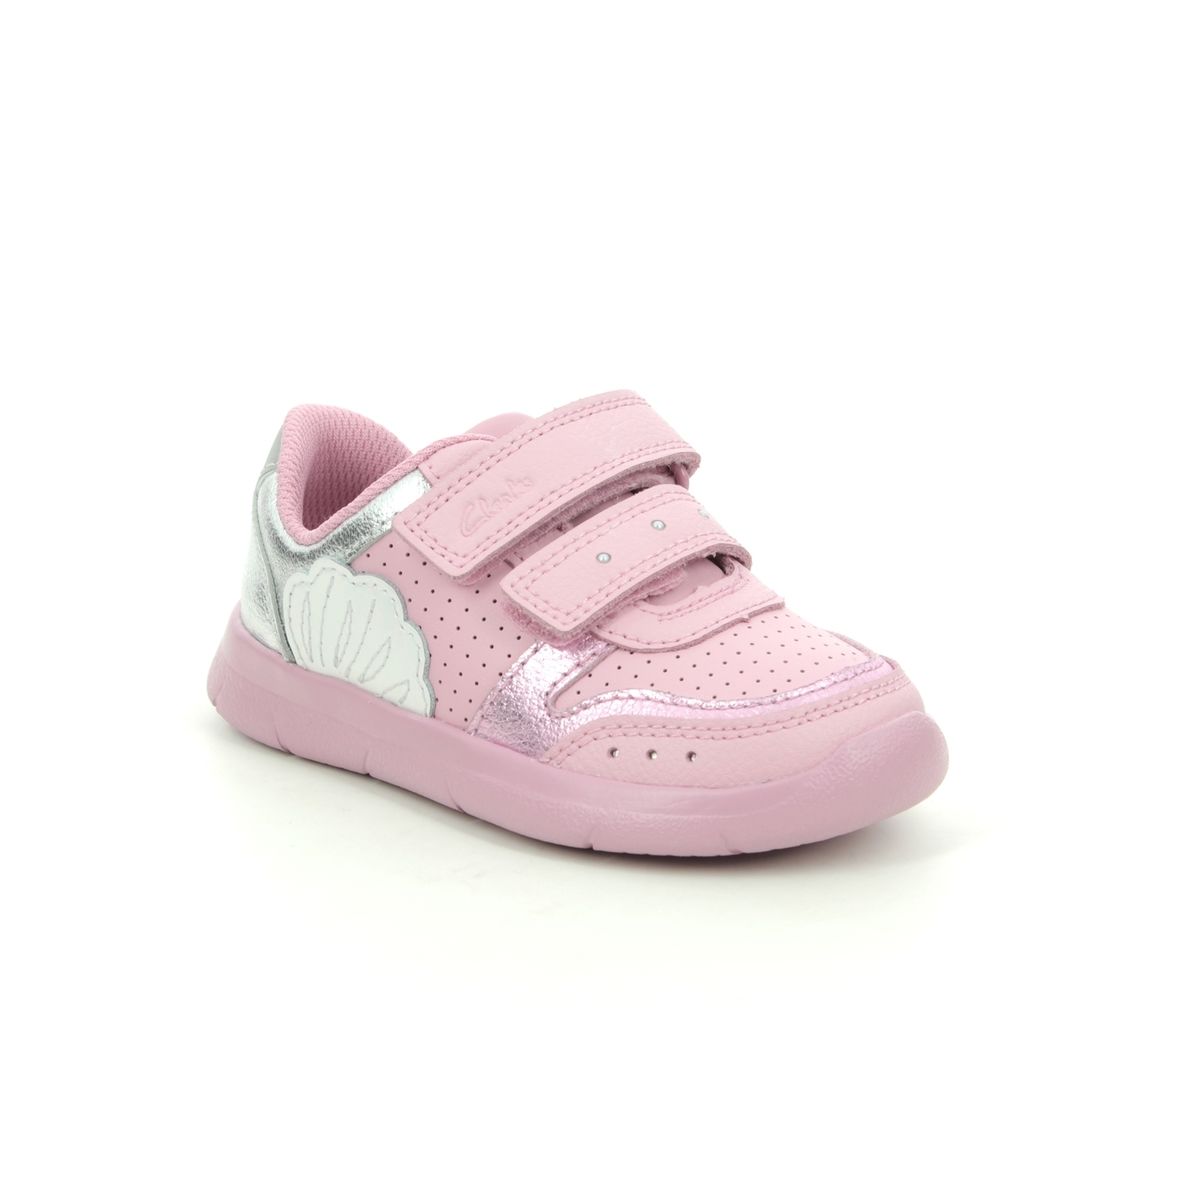 Clarks Ath Shell T Pink Leather Kids Toddler Girls Trainers 588096F In Size 6 In Plain Pink Leather F Width Fitting Regular Fit For kids